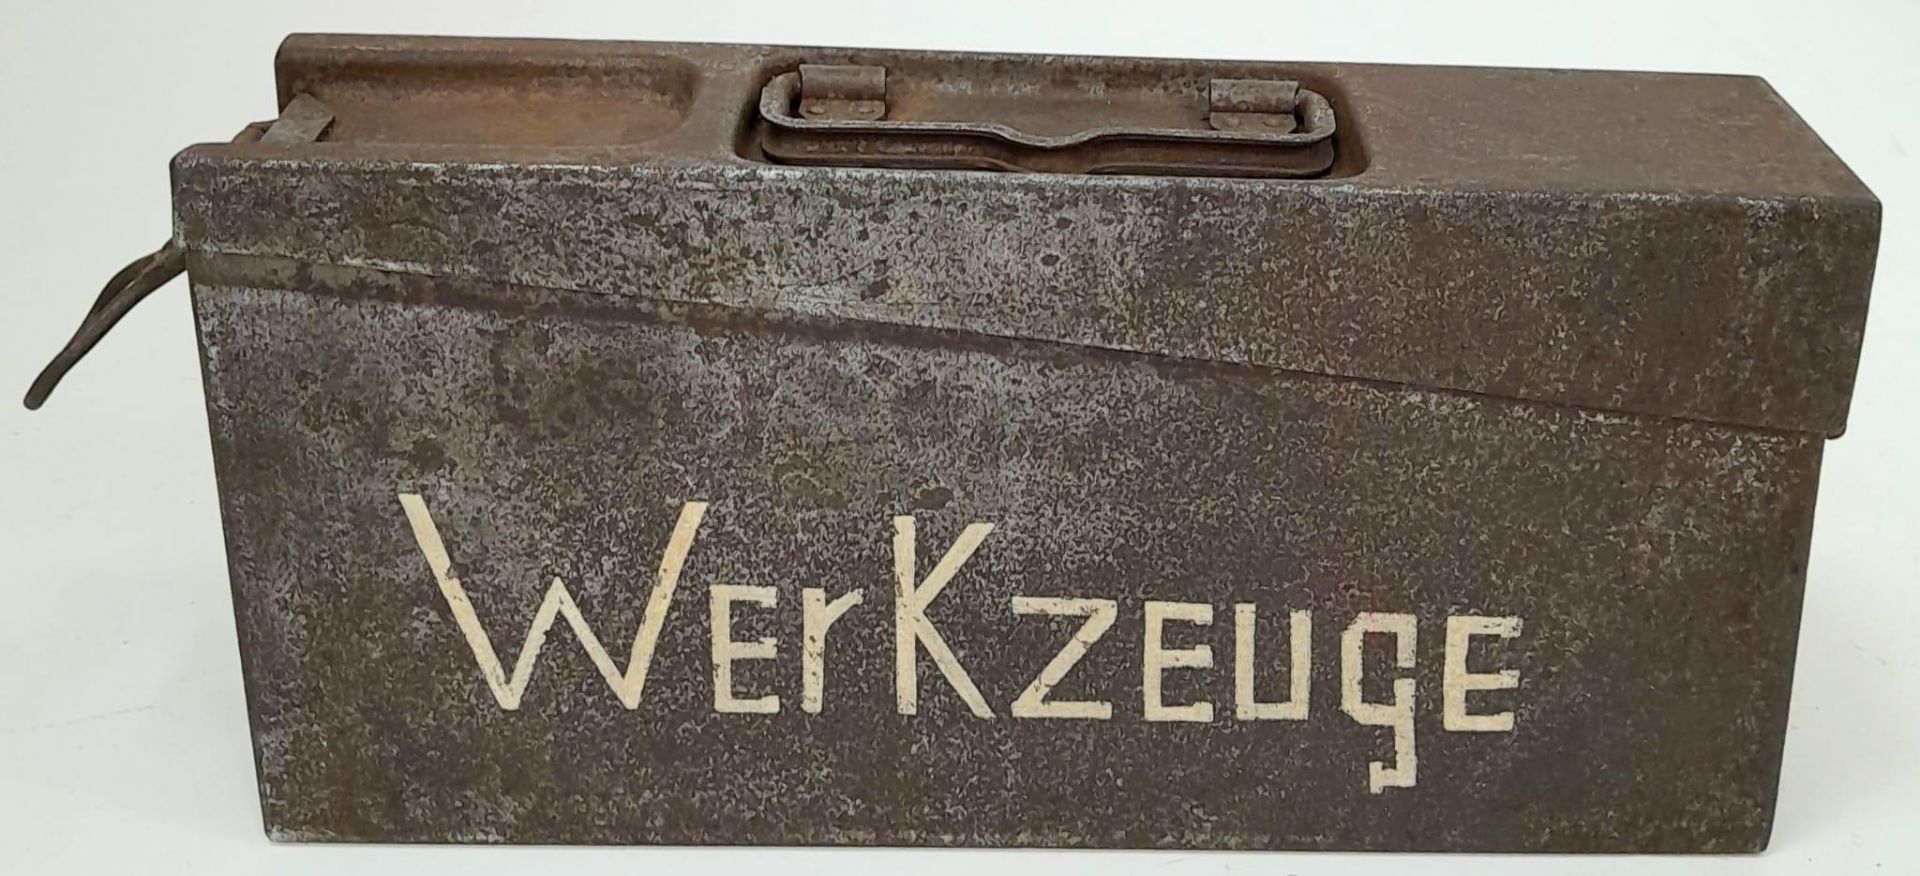 WW1 1917 Dated German MG-08 Ammo Tin. Marked “Werkzeuge” Meaning tools on one side and the unit “4/